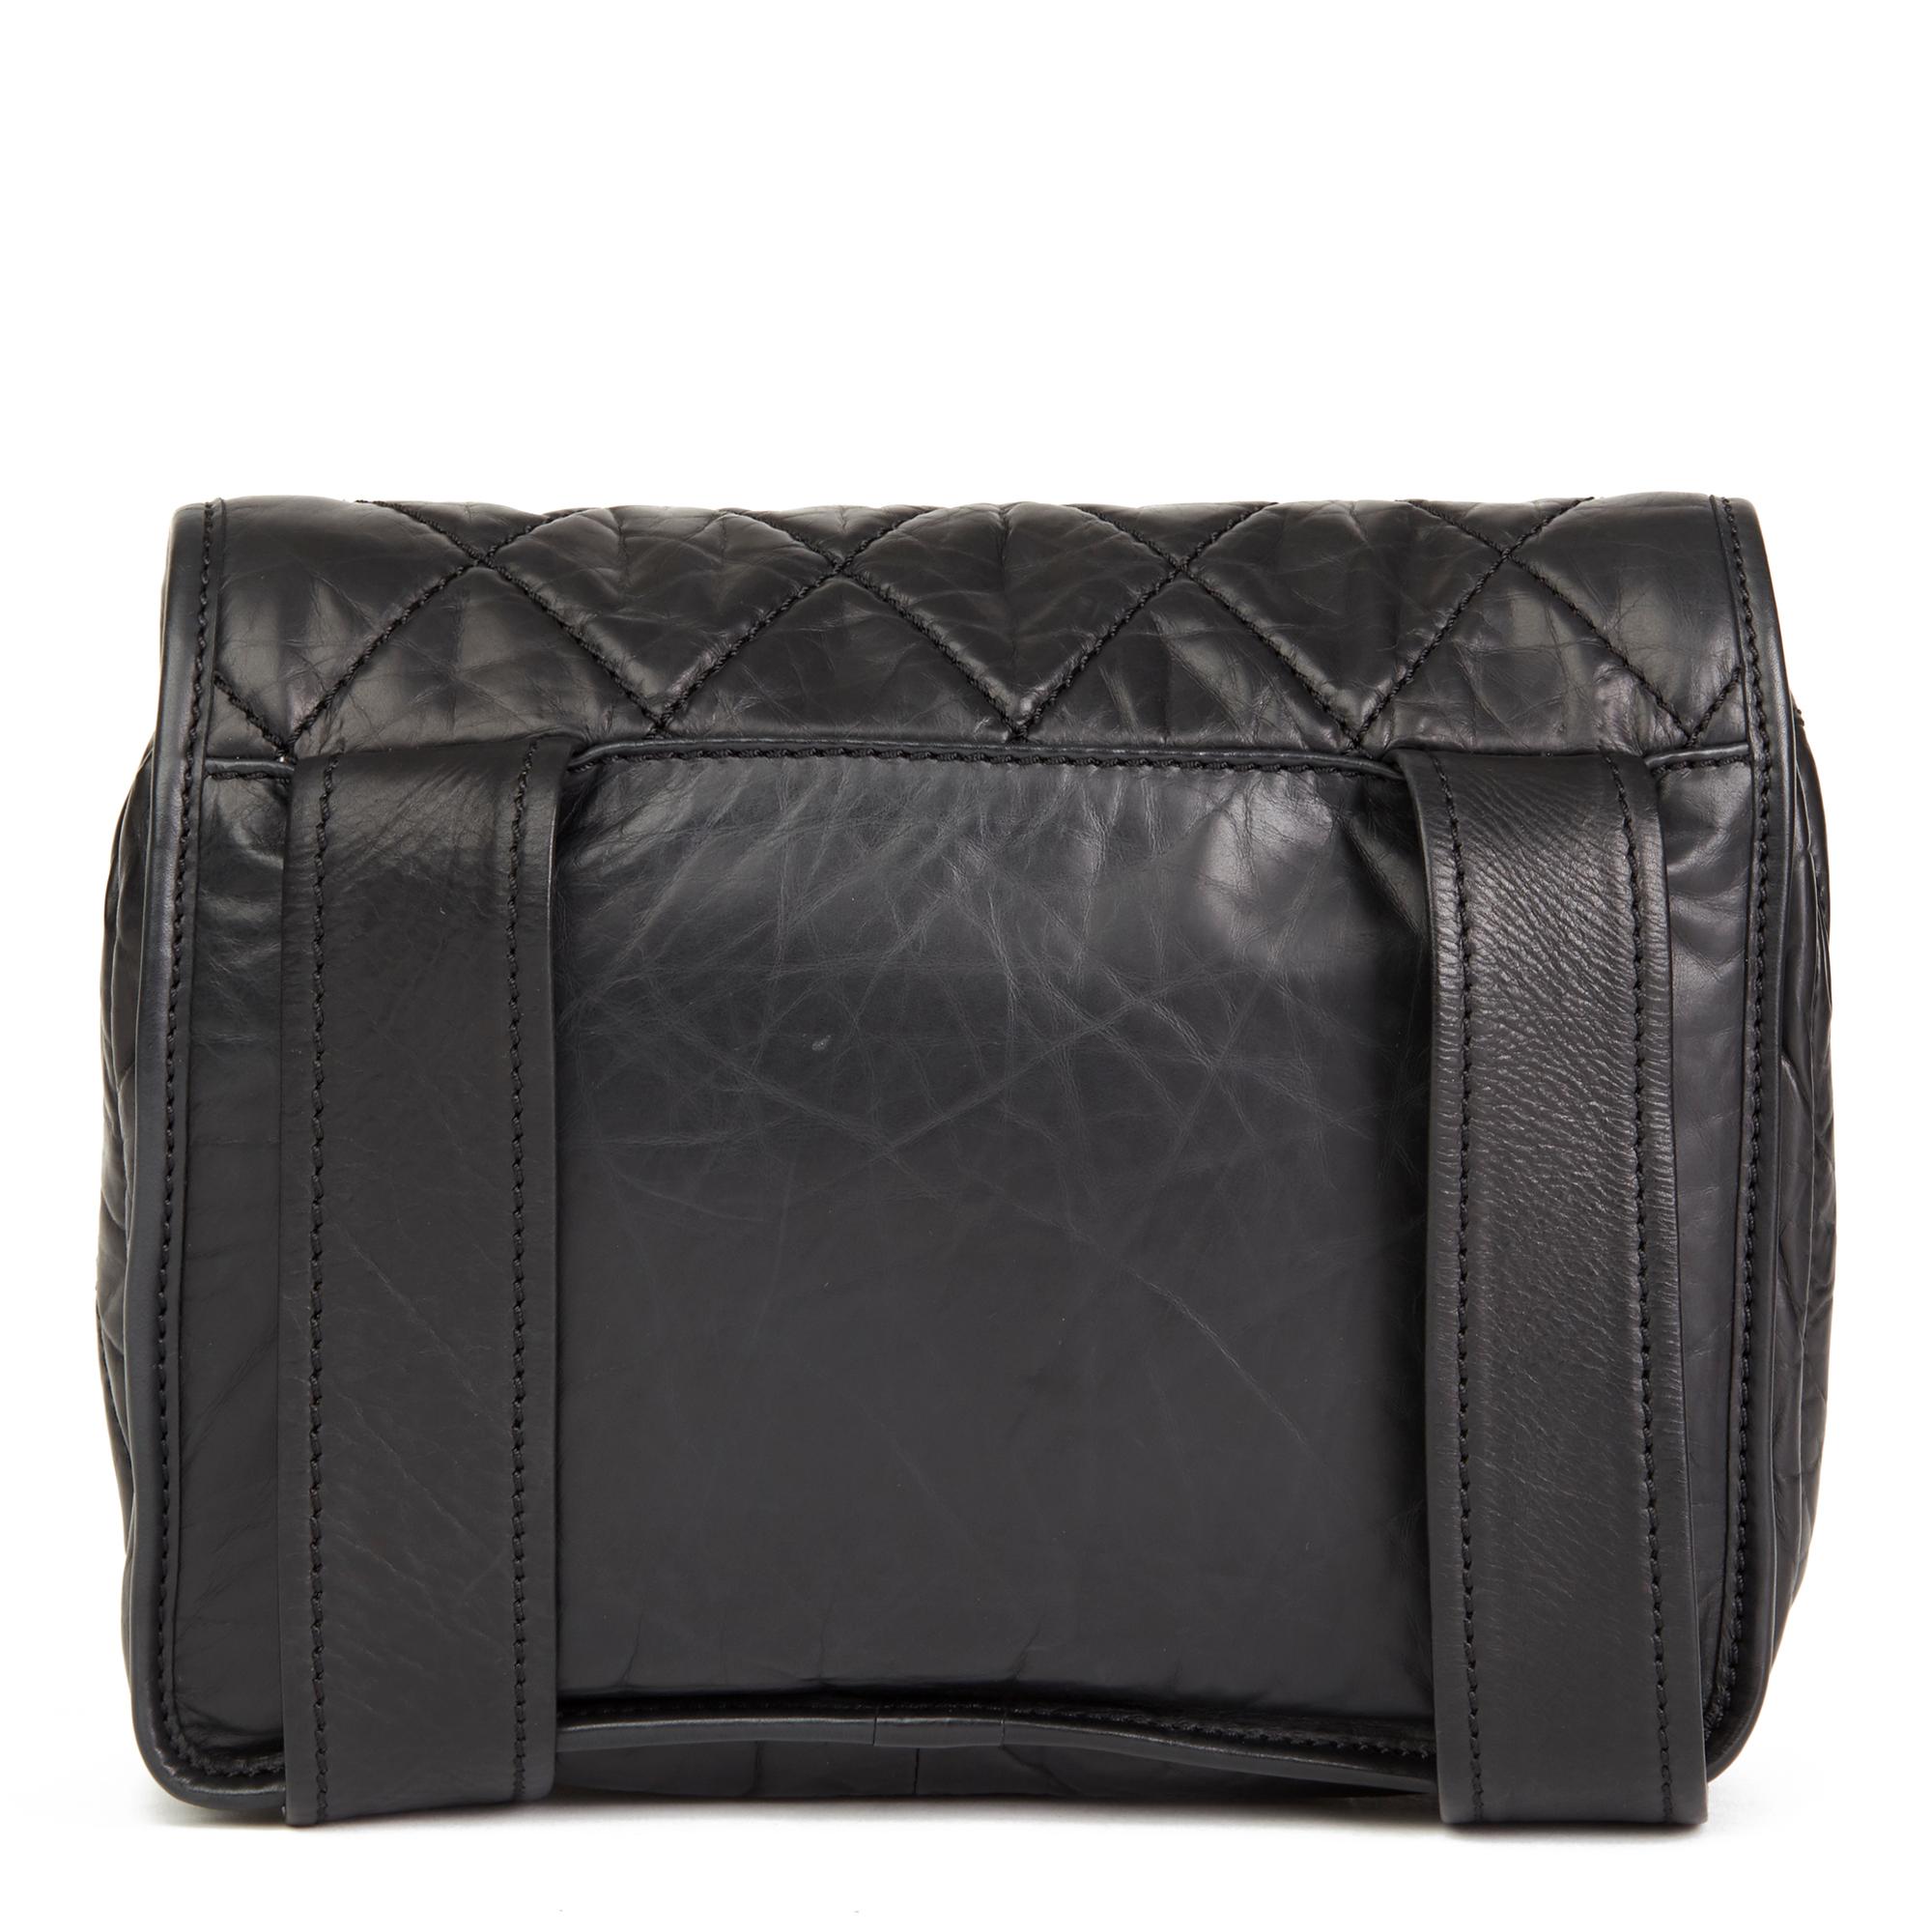 Women's 2005 Chanel Black Quilted Aged Calfskin Leather Timeless Messenger Flap Bag